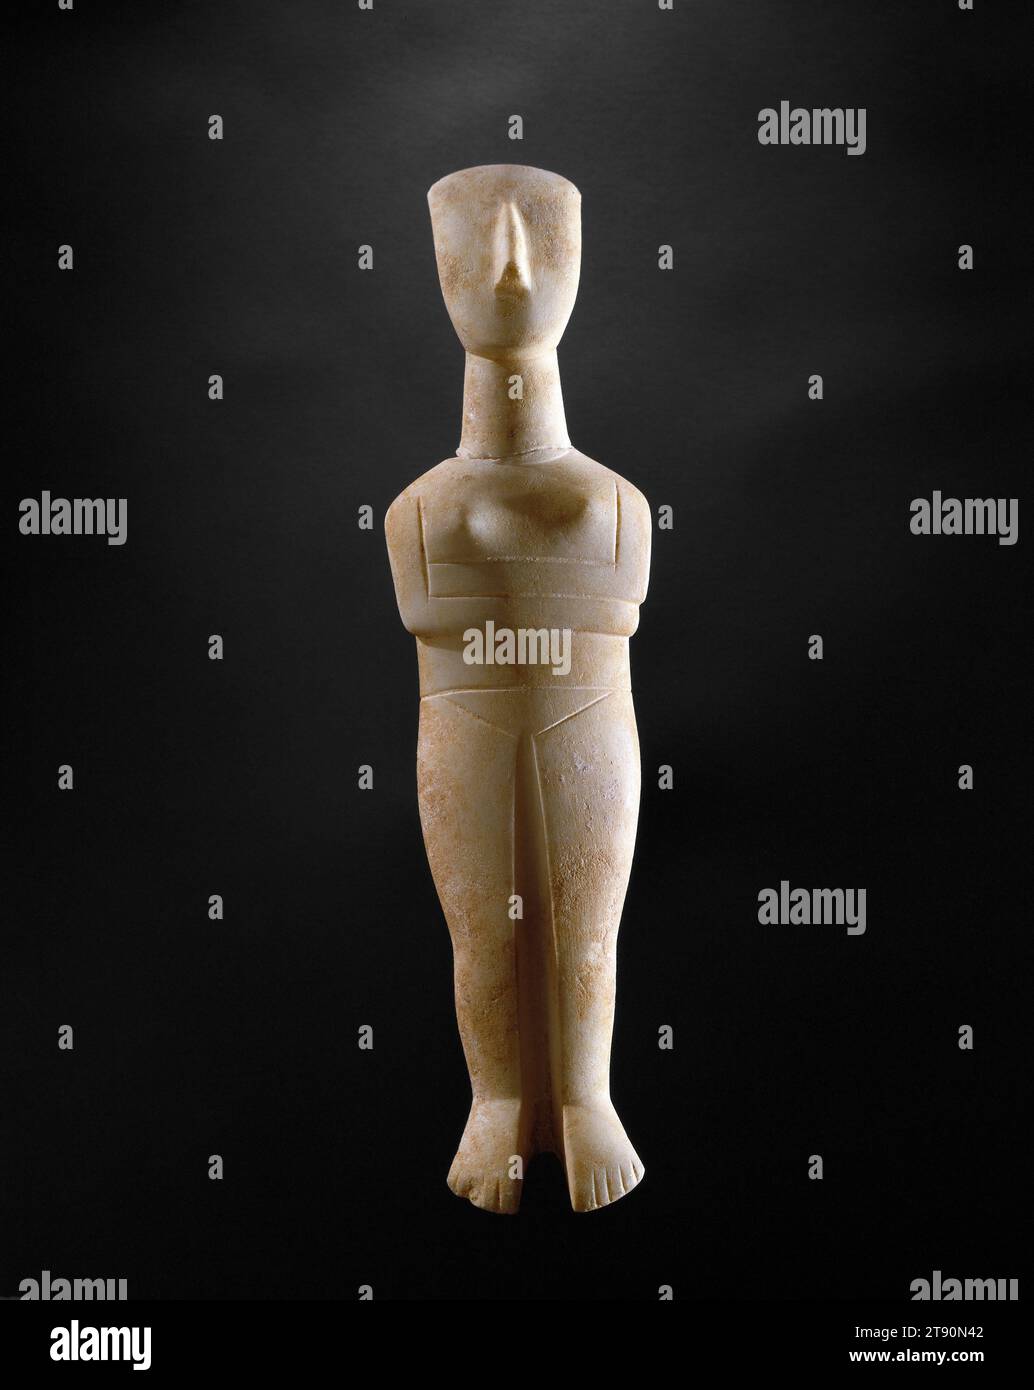 Female Figure, c. 2500-2400 BCE, 16 1/4 x 4 1/4 x 1 9/16 in. (41.28 x 10.8 x 3.97 cm), Marble, Greece, 26th-24th century BCE, This female figure comes from the Cyclades, a chain of islands off the coast of mainland Greece. Scholars classify it among the late Spedos variety, so named after the Bronze Age cemetery where a number of such sculptures were discovered. Examples have been found only on the Cycladic islands of Naxos and Keros. Identifying features include a deep groove separating the legs, individually carved feet, and minimal incised details. Although their exact function is unknown Stock Photo